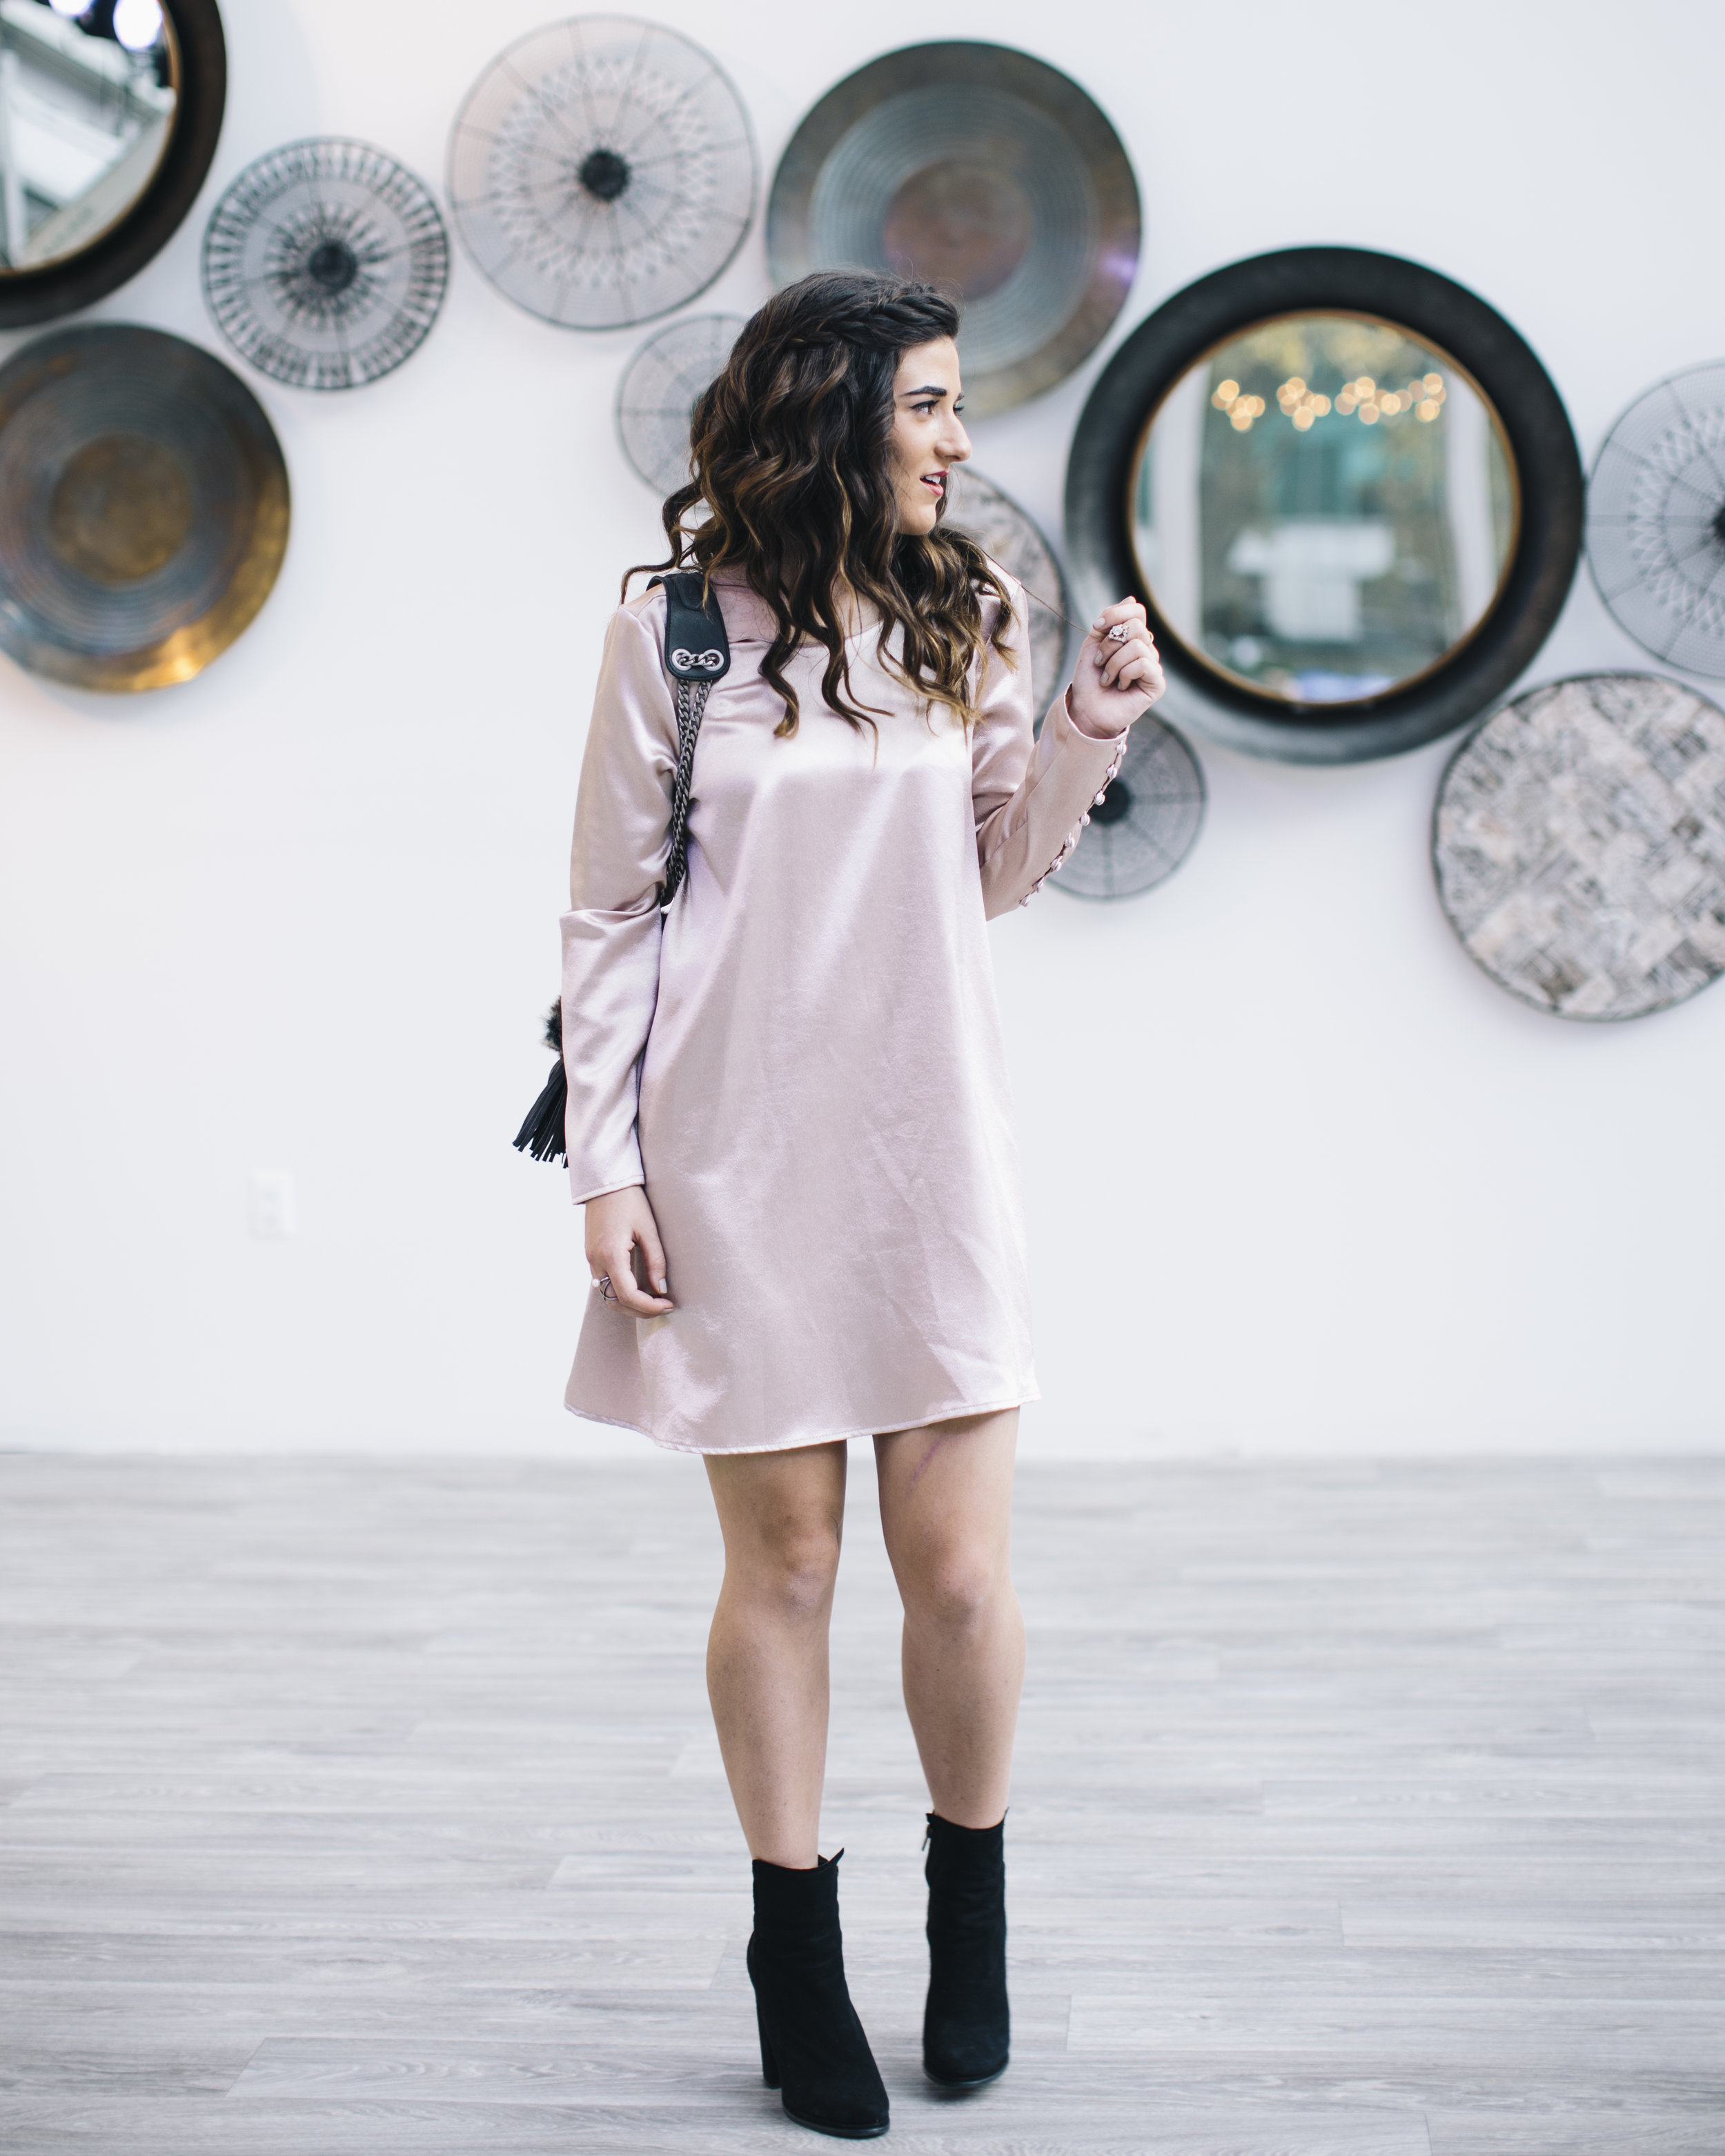 blush dress with black shoes